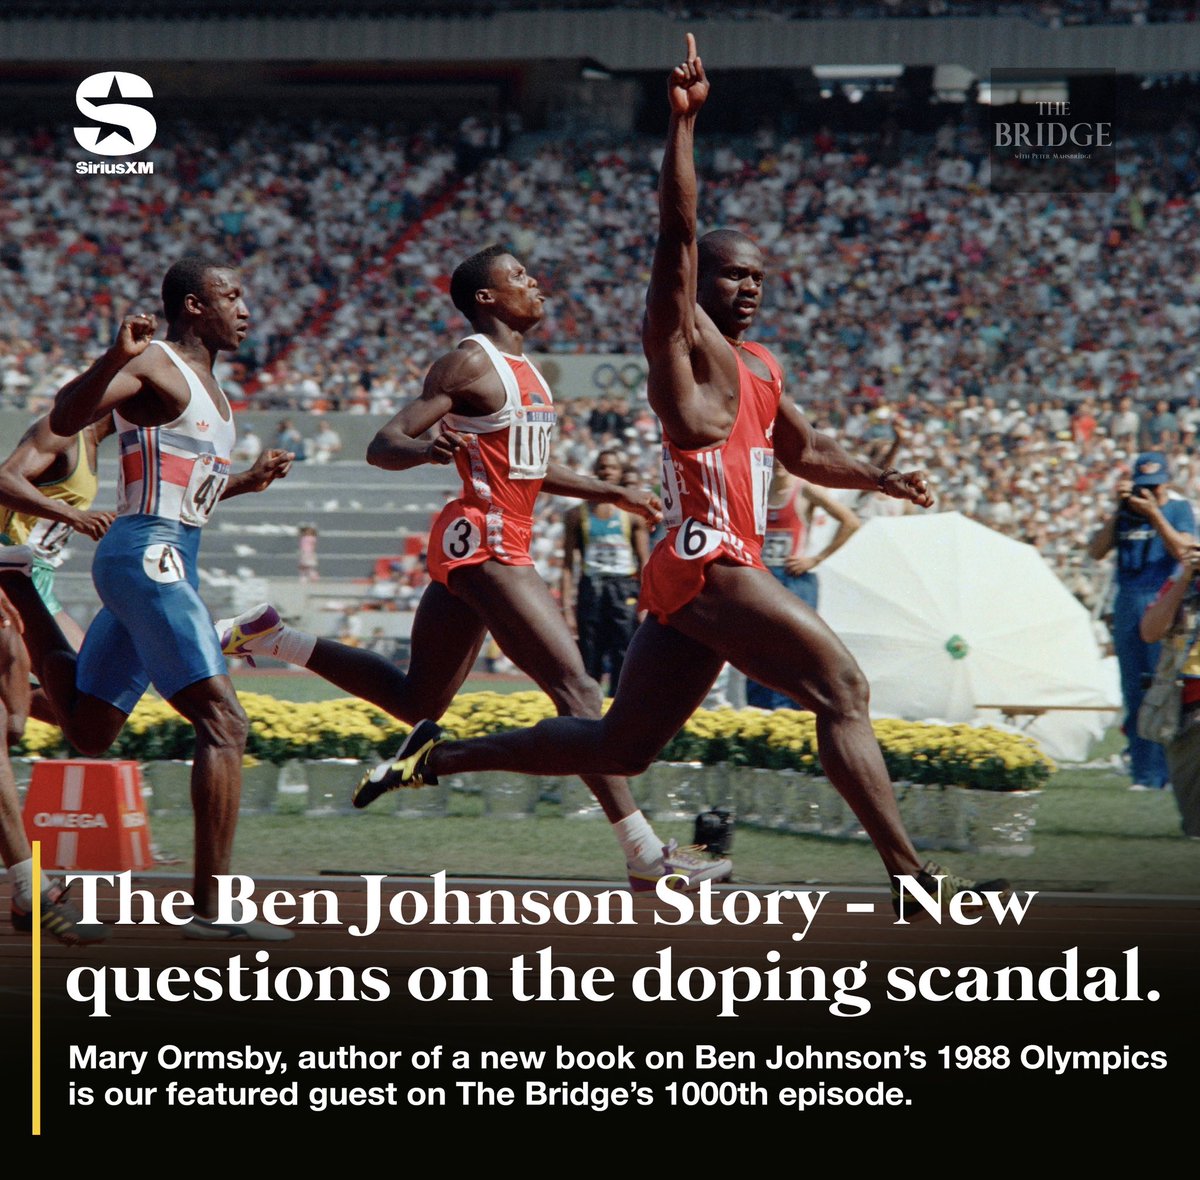 A new book on the Ben Johnson story raises interesting questions around the way the Canadian track star was treated after he tested positive in the 1988 Olympics. Author @MaryOrmsby joins today to discuss. Noon EST on @CanadaTalks167, and all podcast platforms.